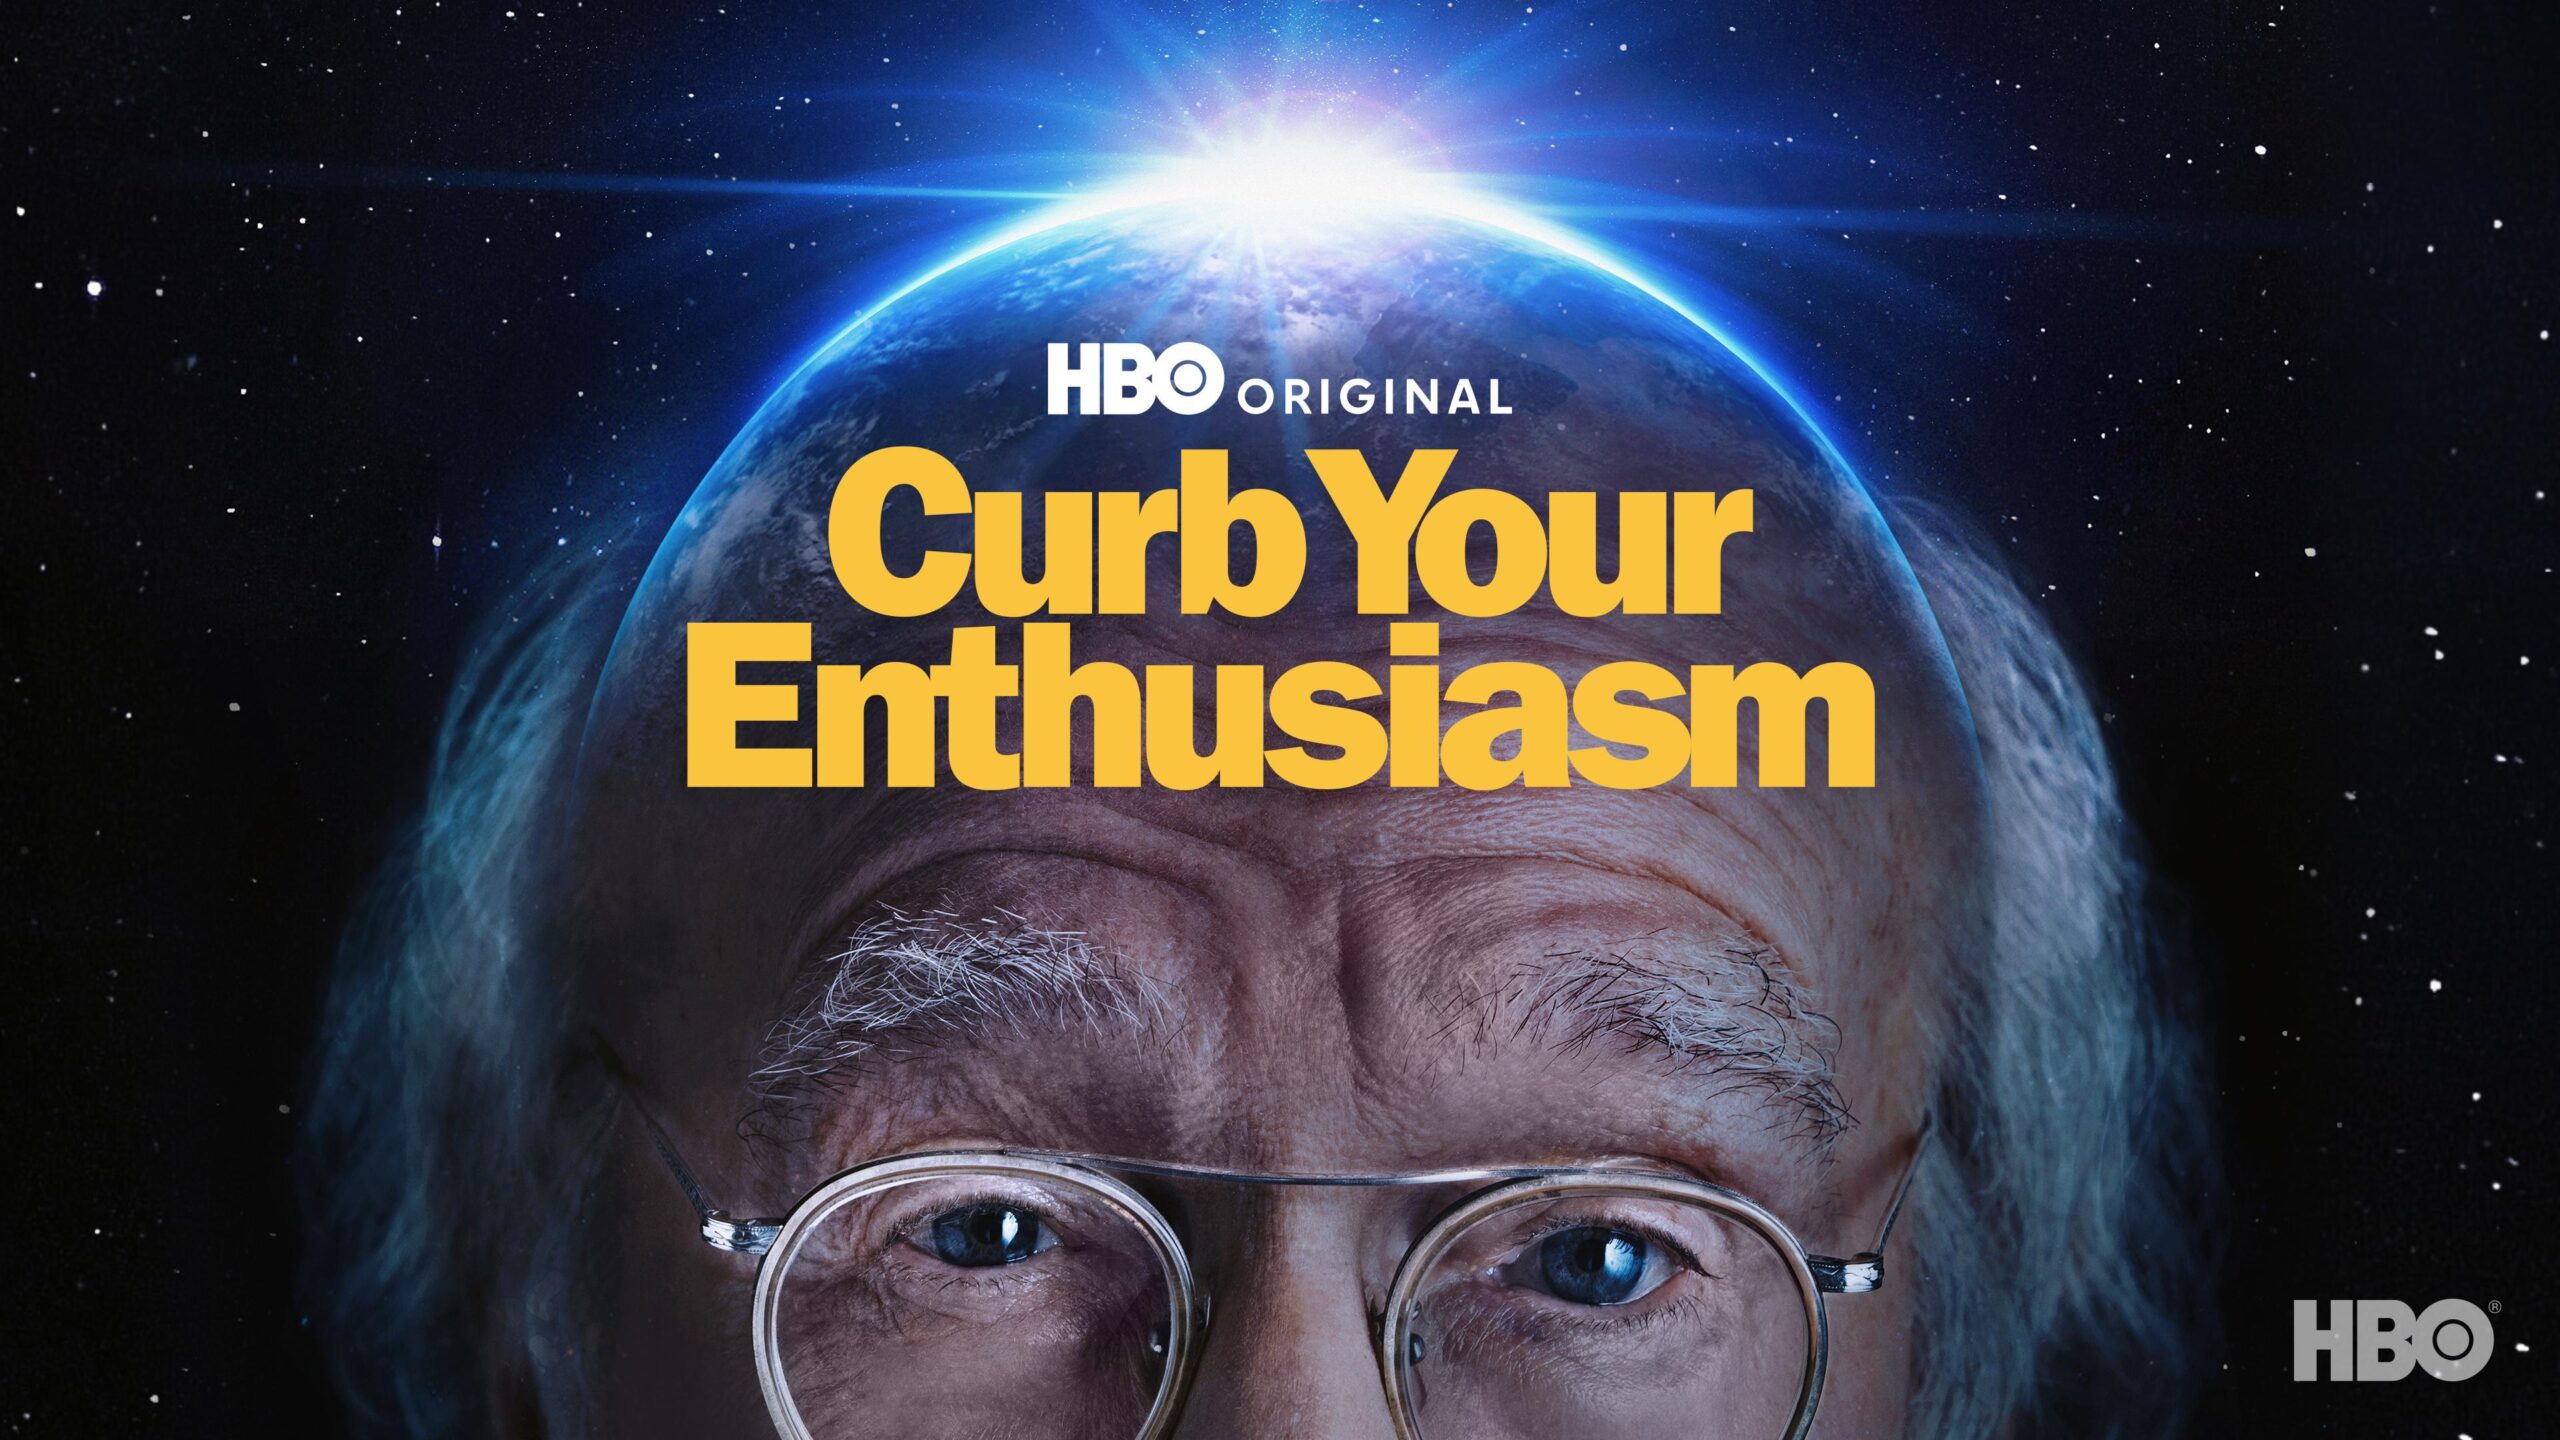 Series: Curb Your Enthusiasm